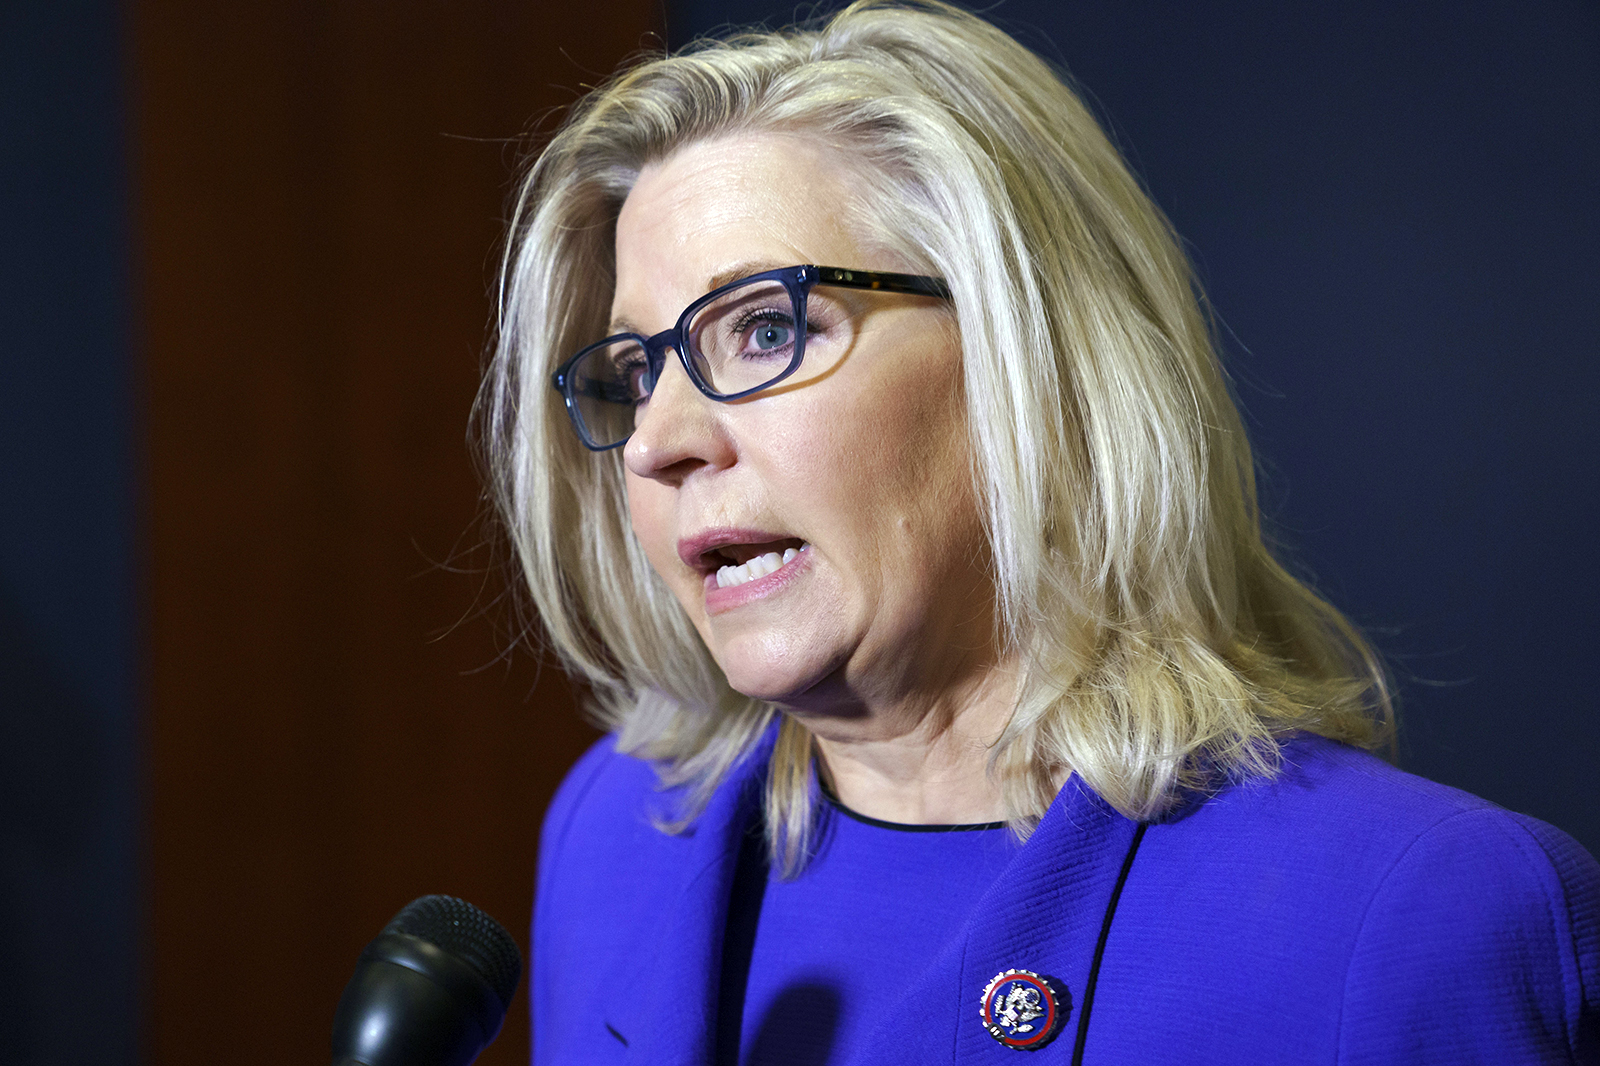 Rep. Liz Cheney, R-Wyo., speaks to reporters at the Capitol in Washington on May 12, 2021, after House Republicans voted to oust her from her leadership post as chair of the House Republican Conference because of her repeated criticism of former President Donald Trump for his false claims of election fraud and his role in instigating the Jan. 6 U.S. Capitol attack. (AP Photo/J. Scott Applewhite)